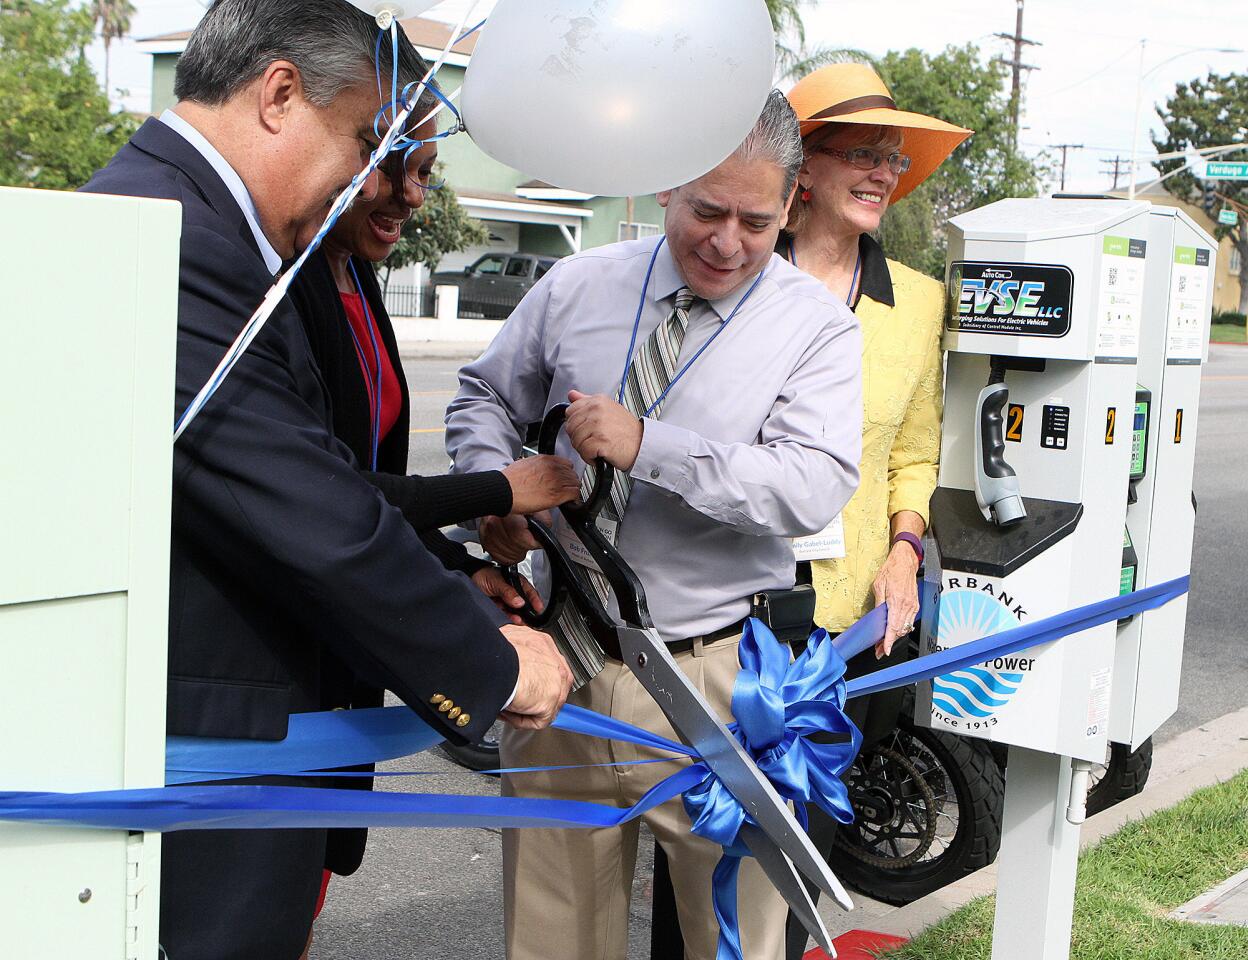 Burbank Mayor Bob Frutos, with Councilman Jess Talamantes, Burbank Water and Power's Janae Scott, and Councilwoman Emily Gabel-Luddy, cut the ribbon for one of the eight dual-charger, electric-vehicle charging stations in Burbank on Tuesday, Aug. 25, 2015.